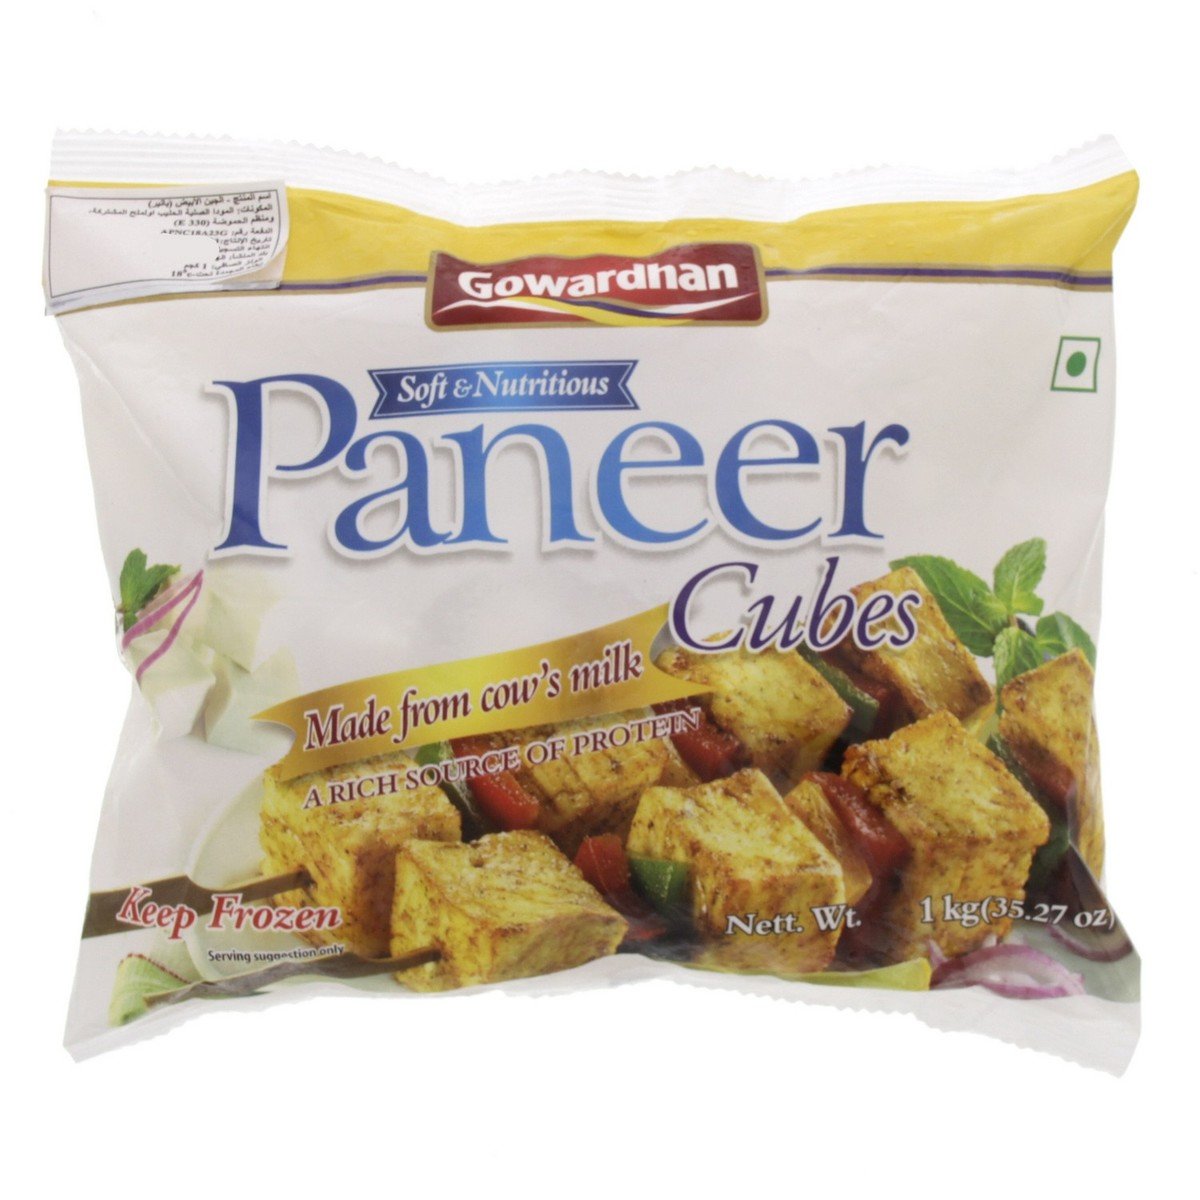 Gowardhan Frozen Soft and Nutritious Paneer Cubes 1 kg